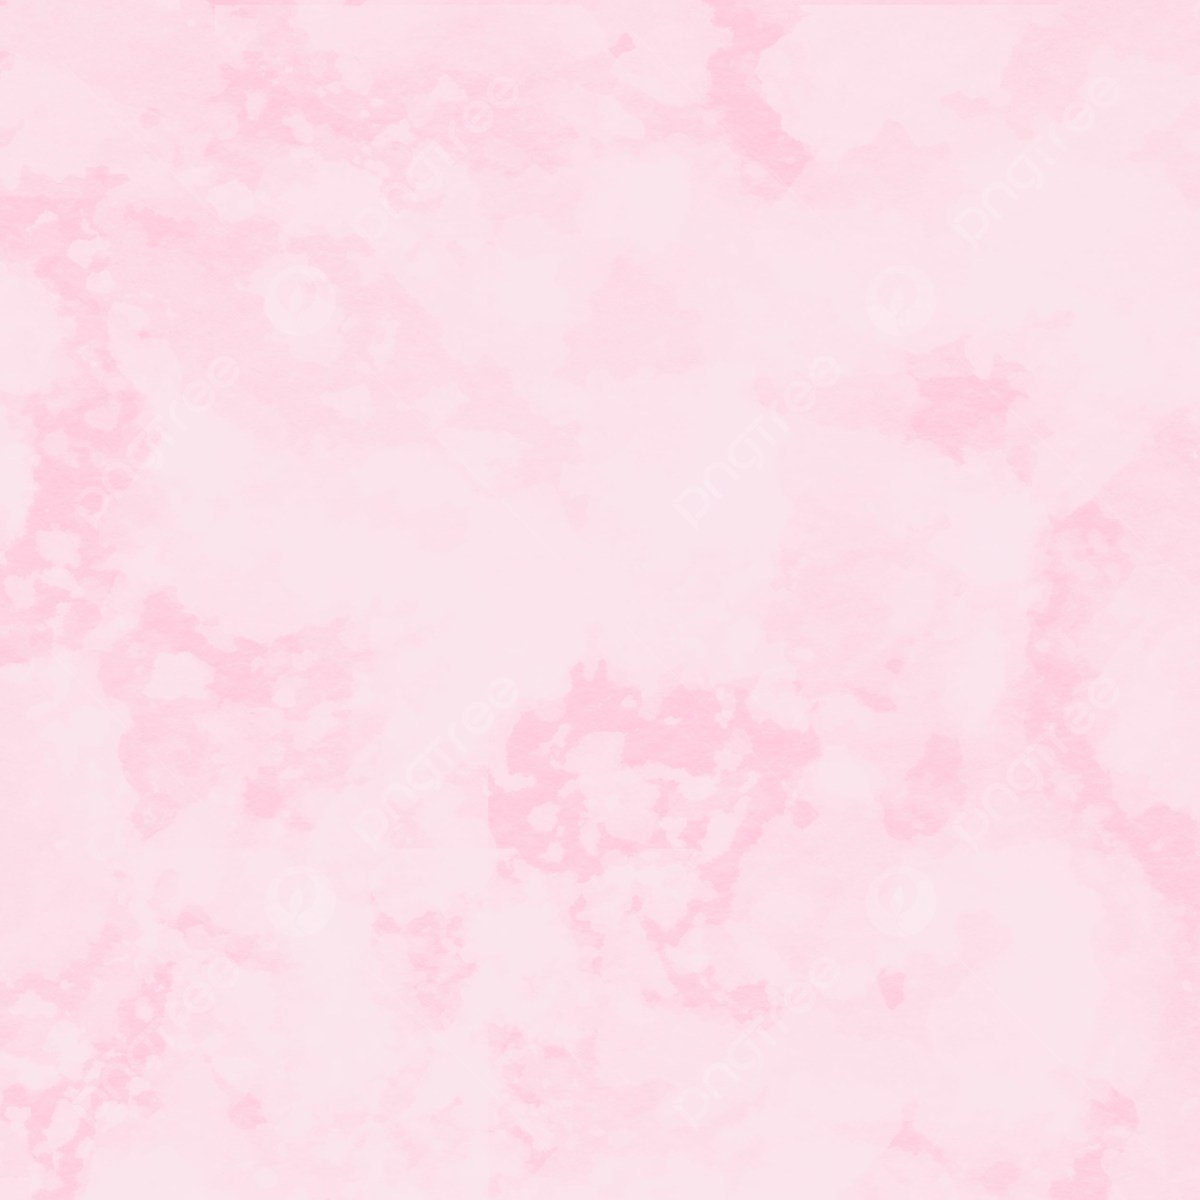 Pink Pastel Background Image, HD Picture and Wallpaper For Free Download